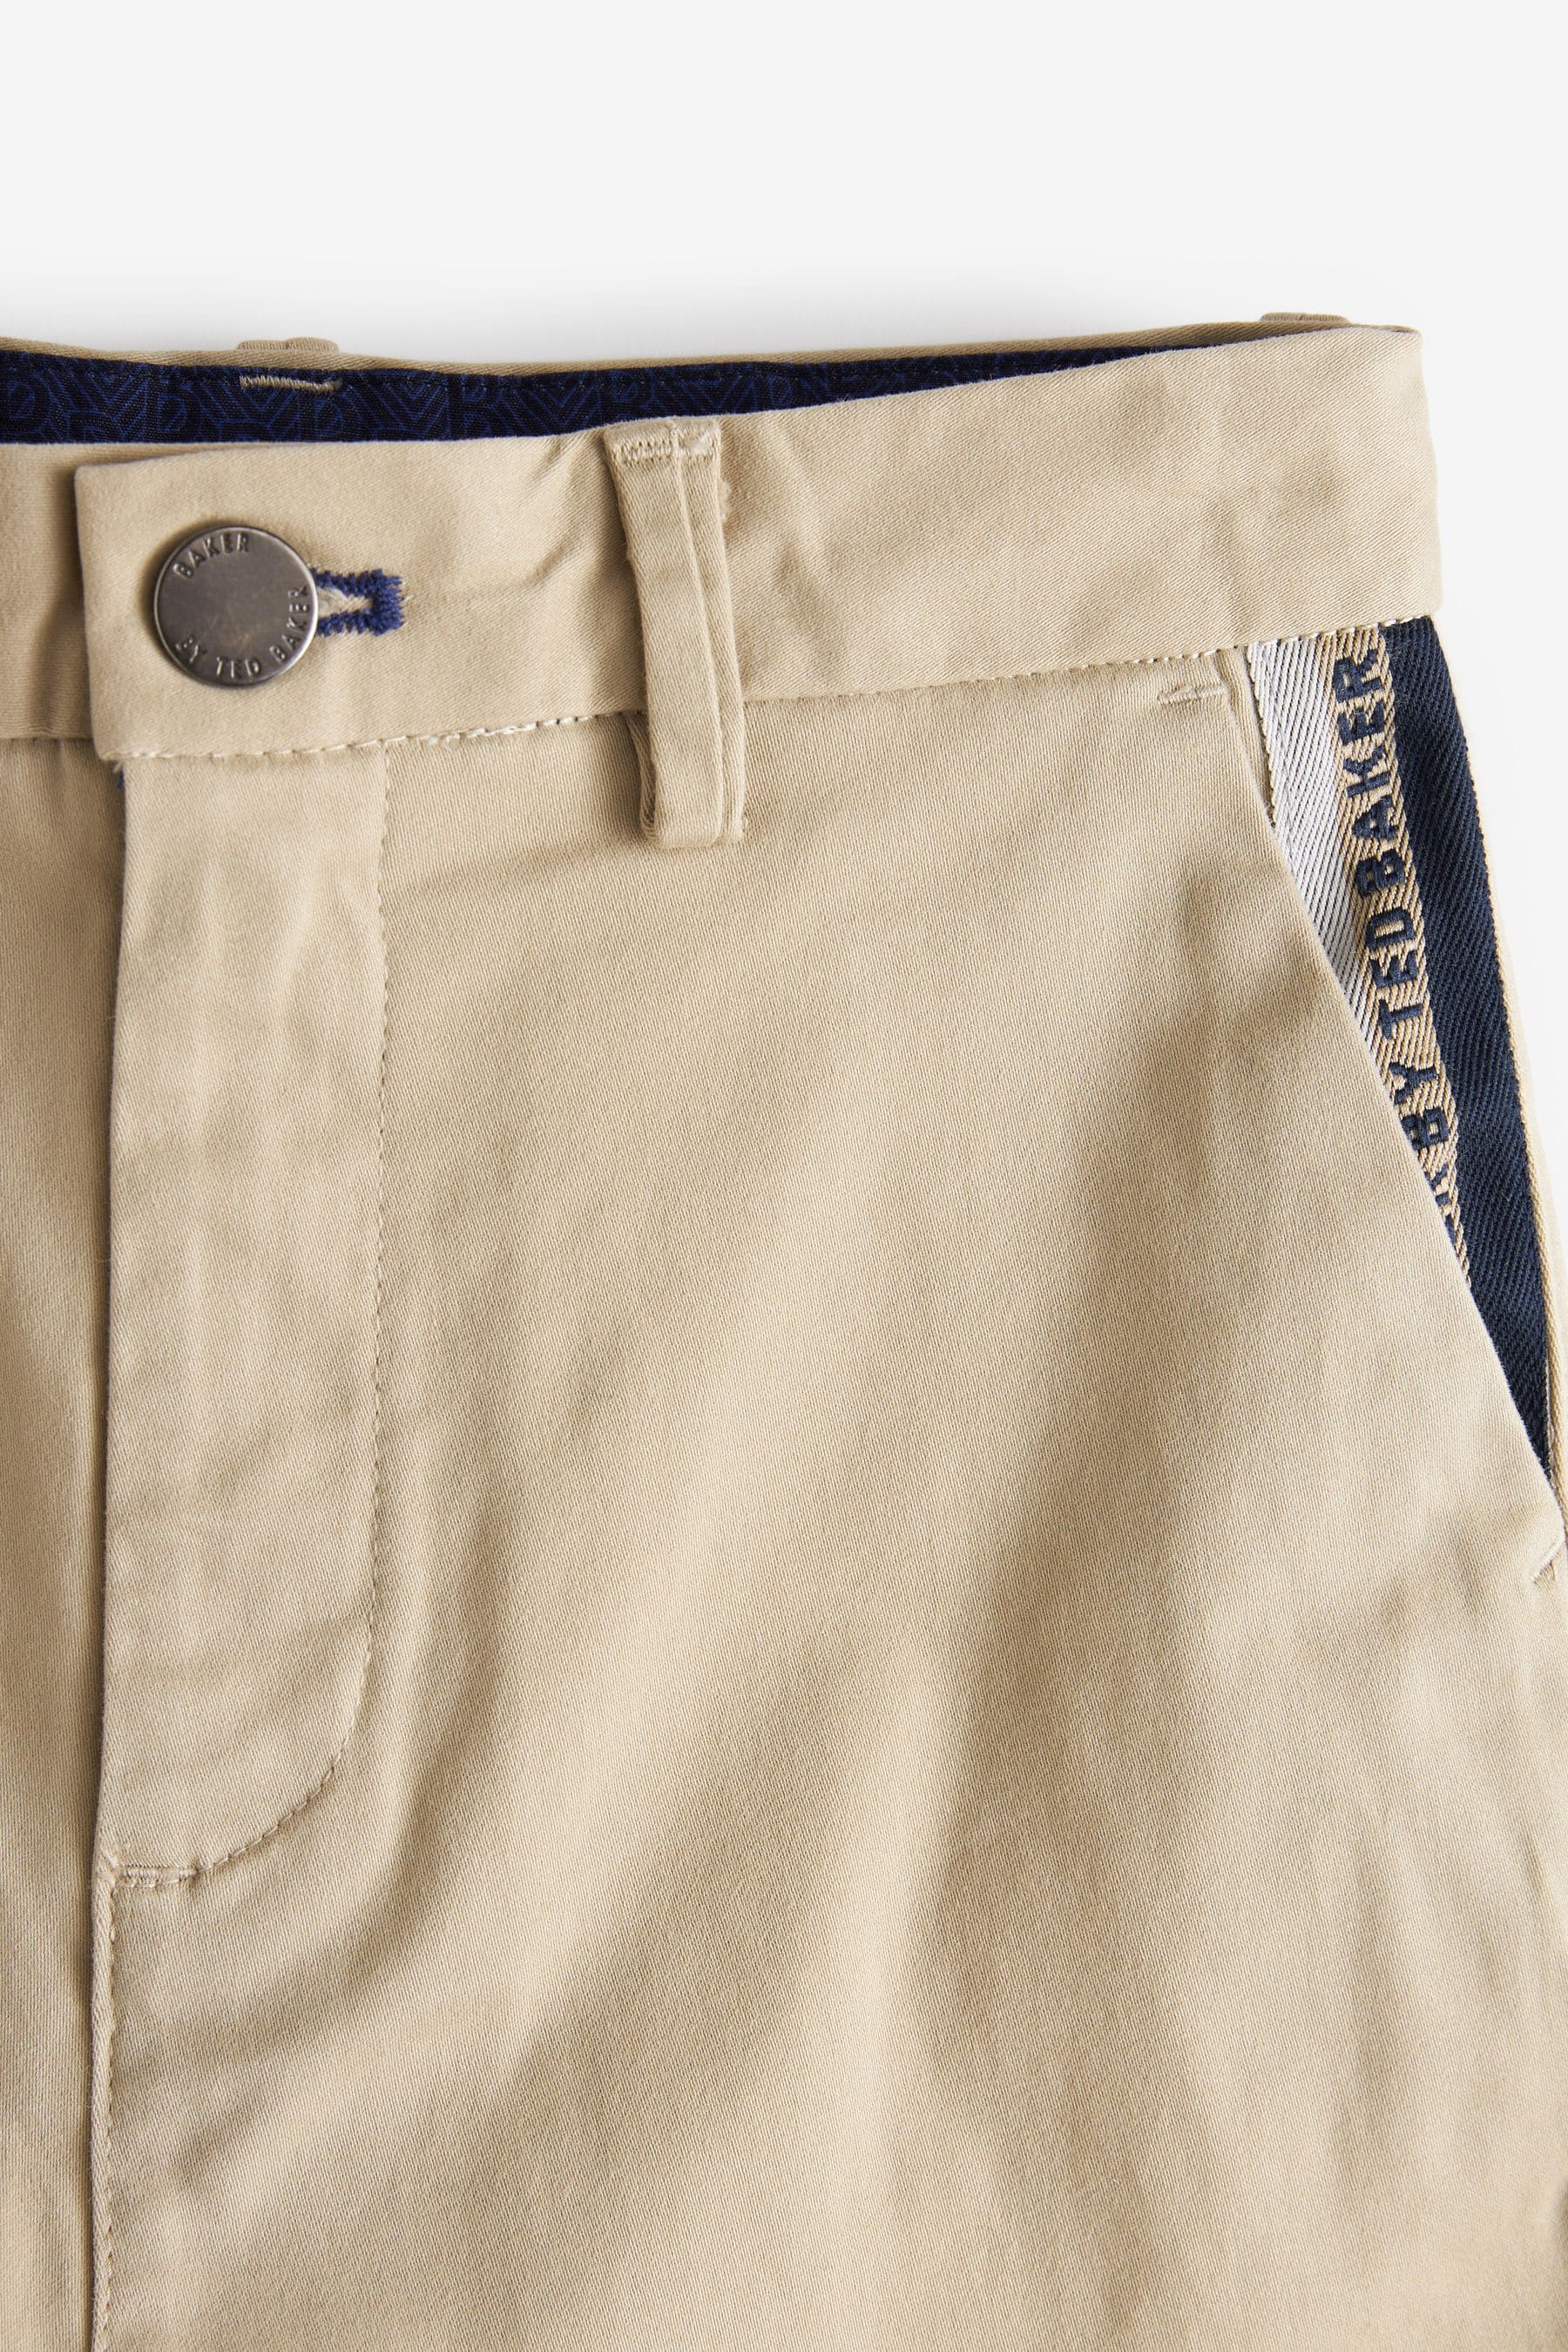 Buy Baker by Ted Baker Chinos from the Next UK online shop